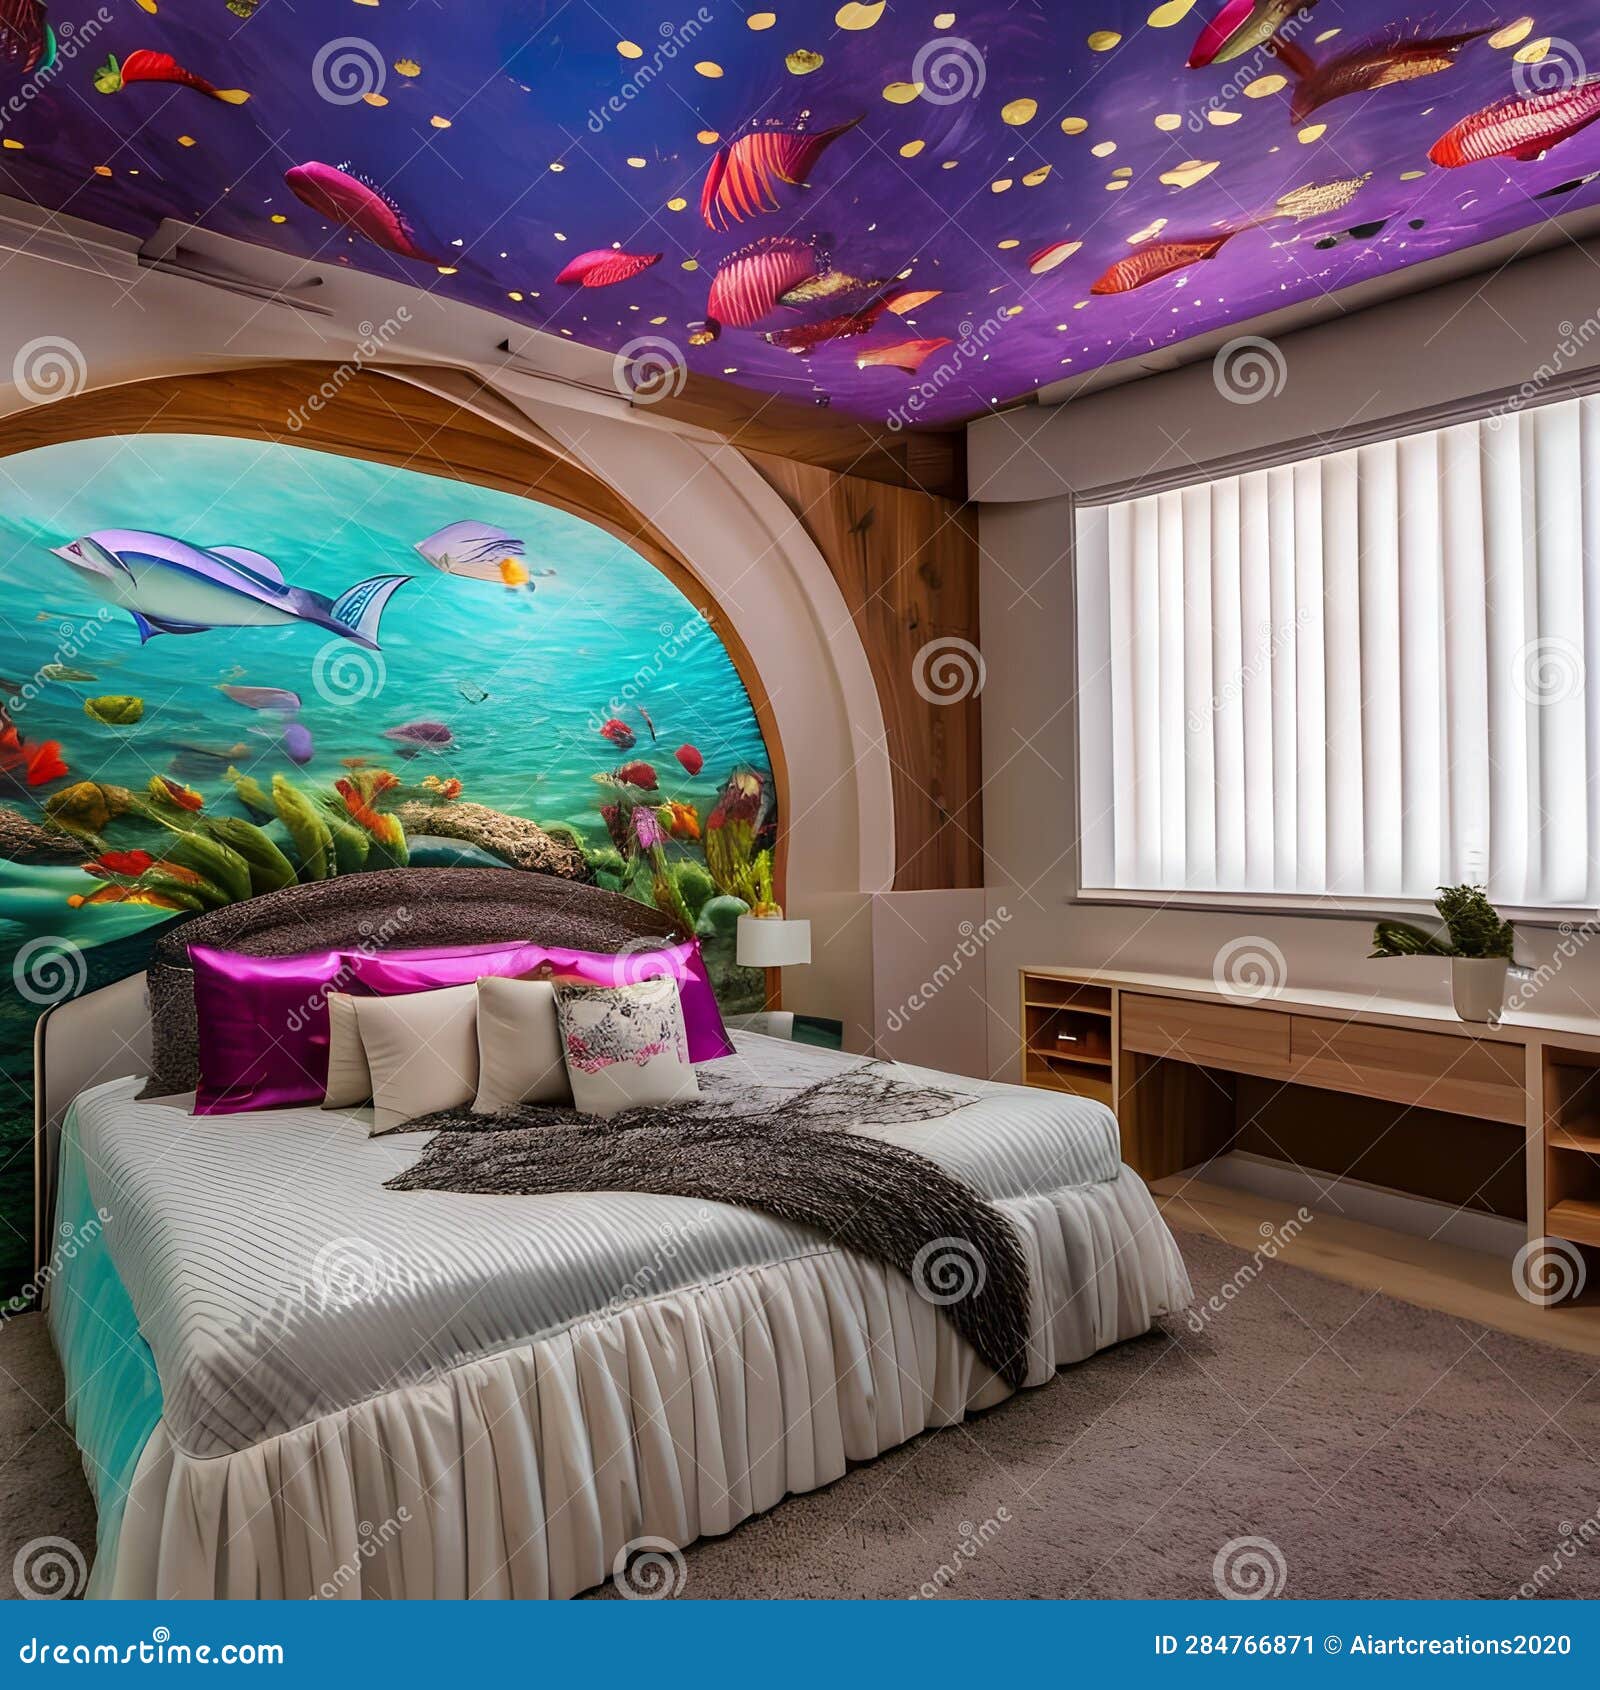 An Underwater Mermaid-themed Bedroom with Seashell-shaped Bed